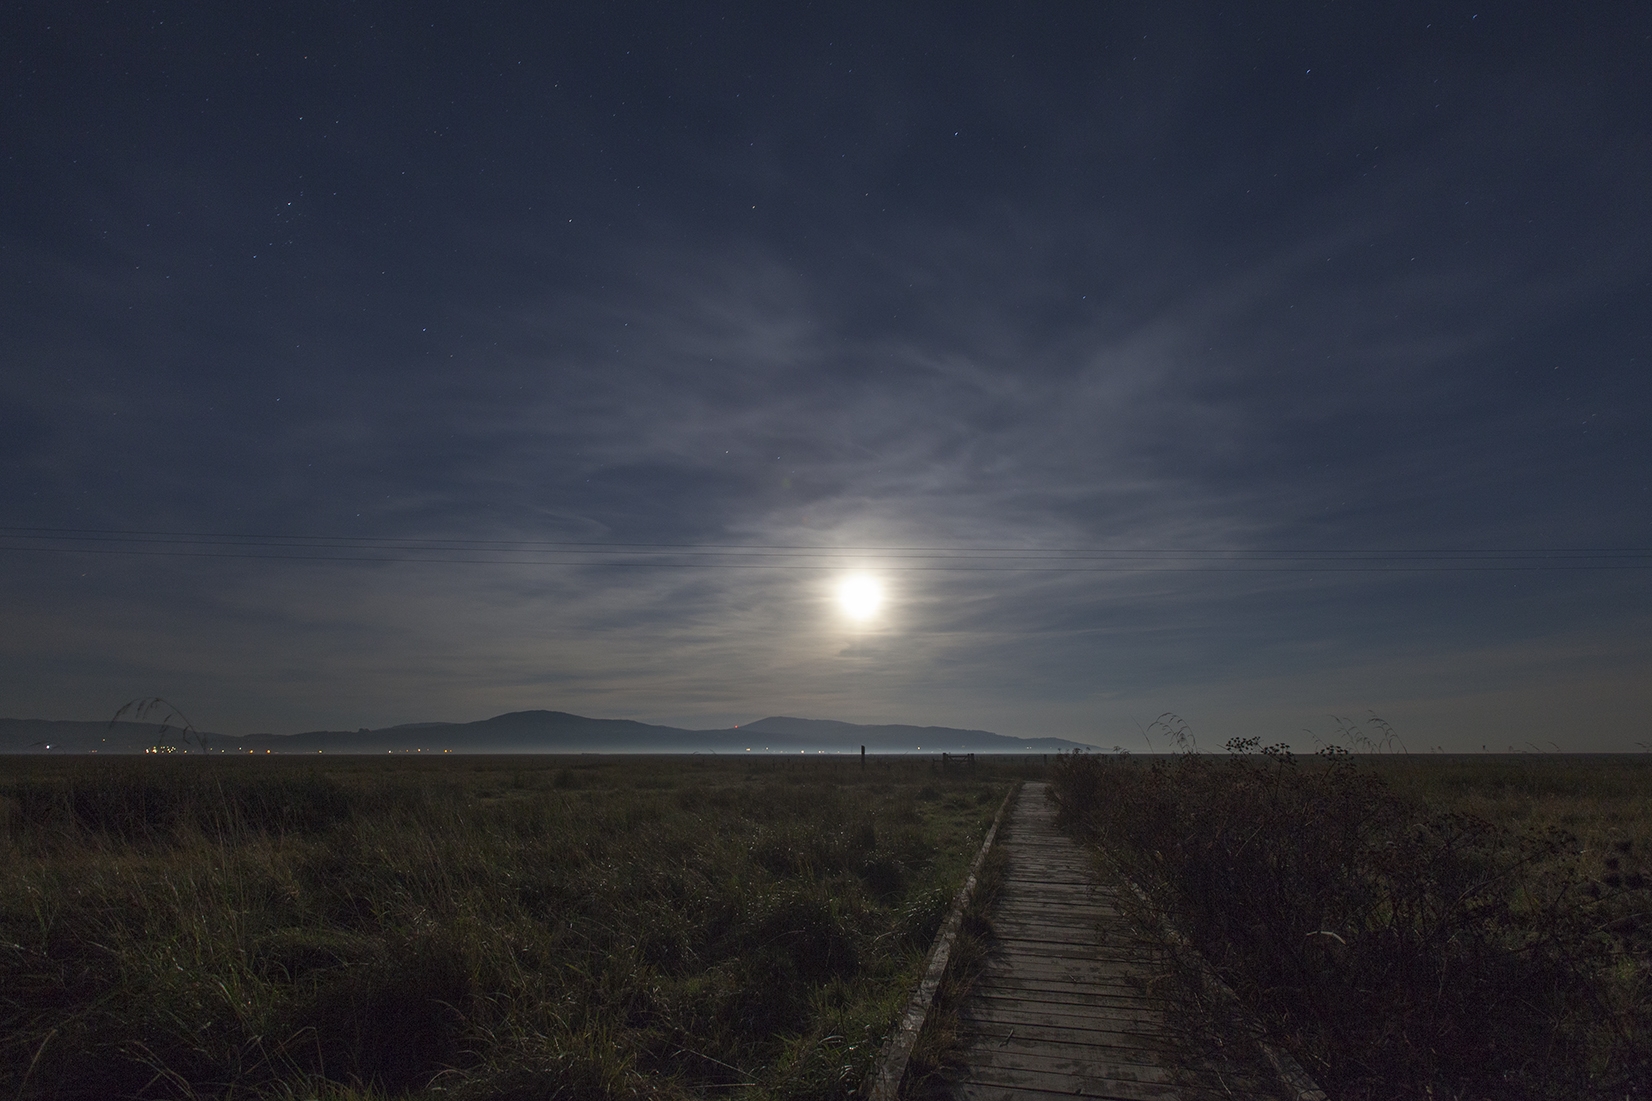 The salt marshes and the wooden walkway to The Martyrs Stake lit up by the moon under a dark sky.